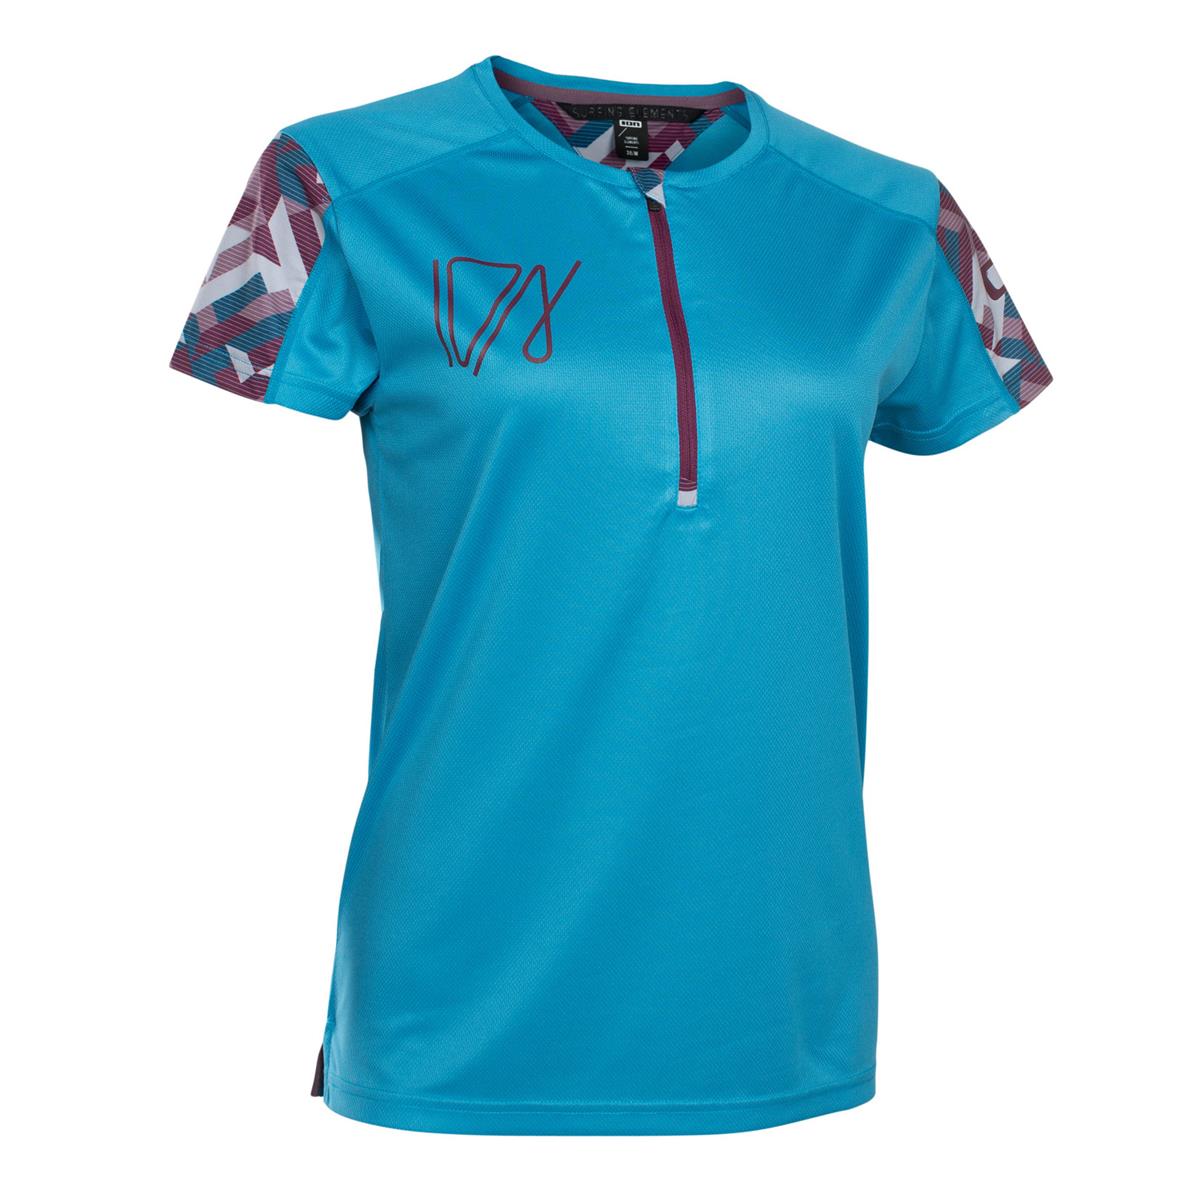 ION Femme Maillot VTT Manches Courtes Traze Bluejay